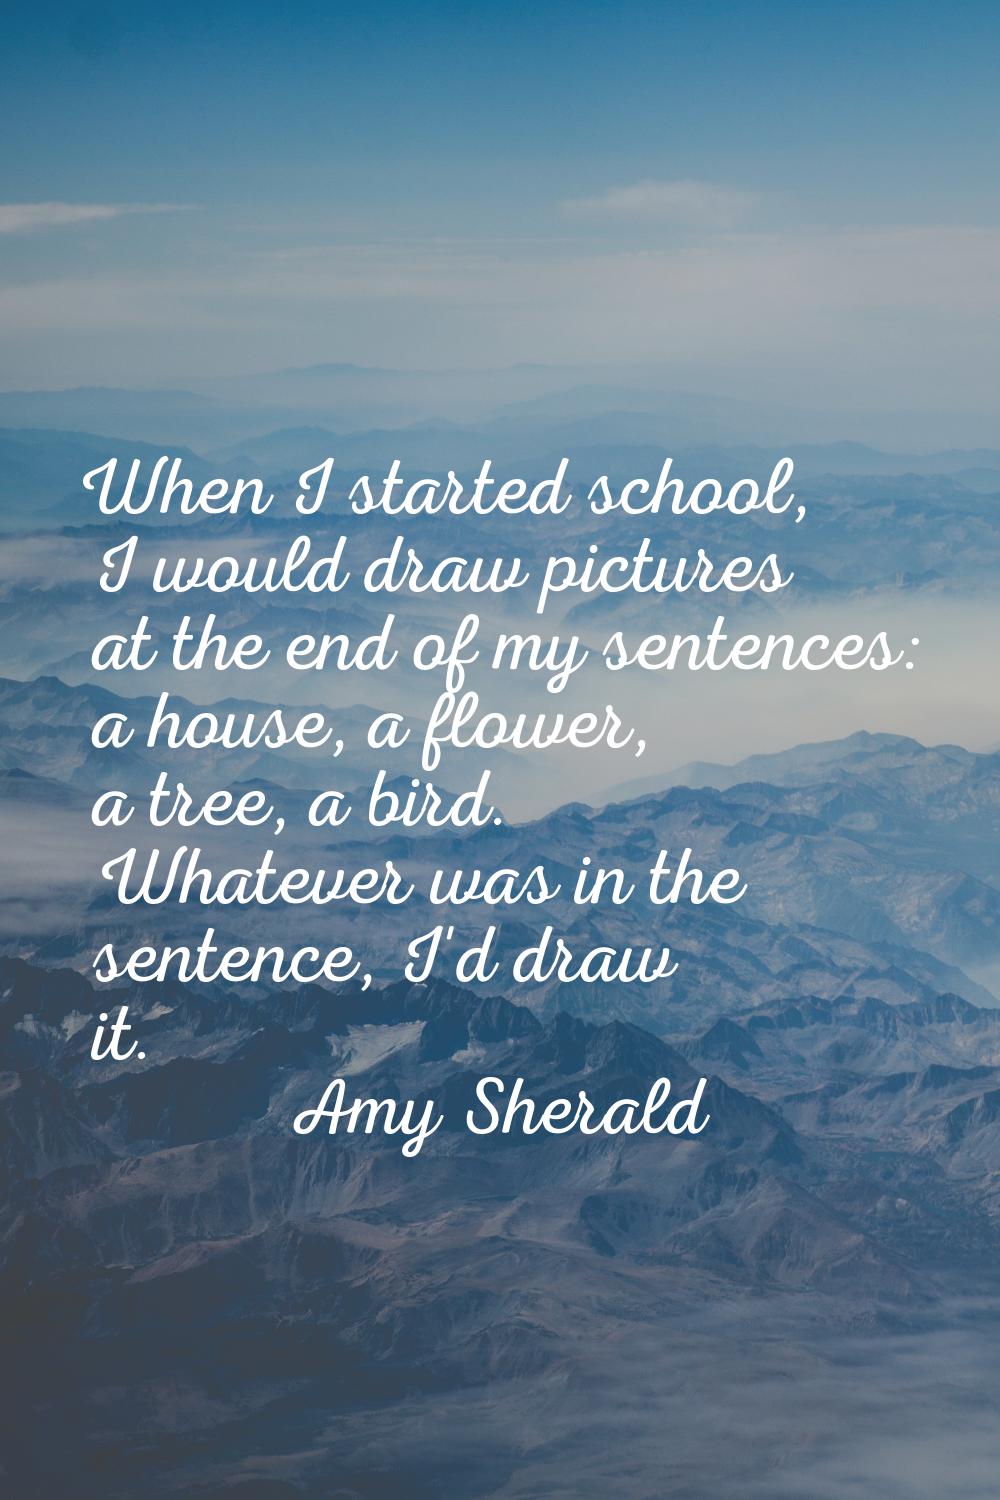 When I started school, I would draw pictures at the end of my sentences: a house, a flower, a tree,